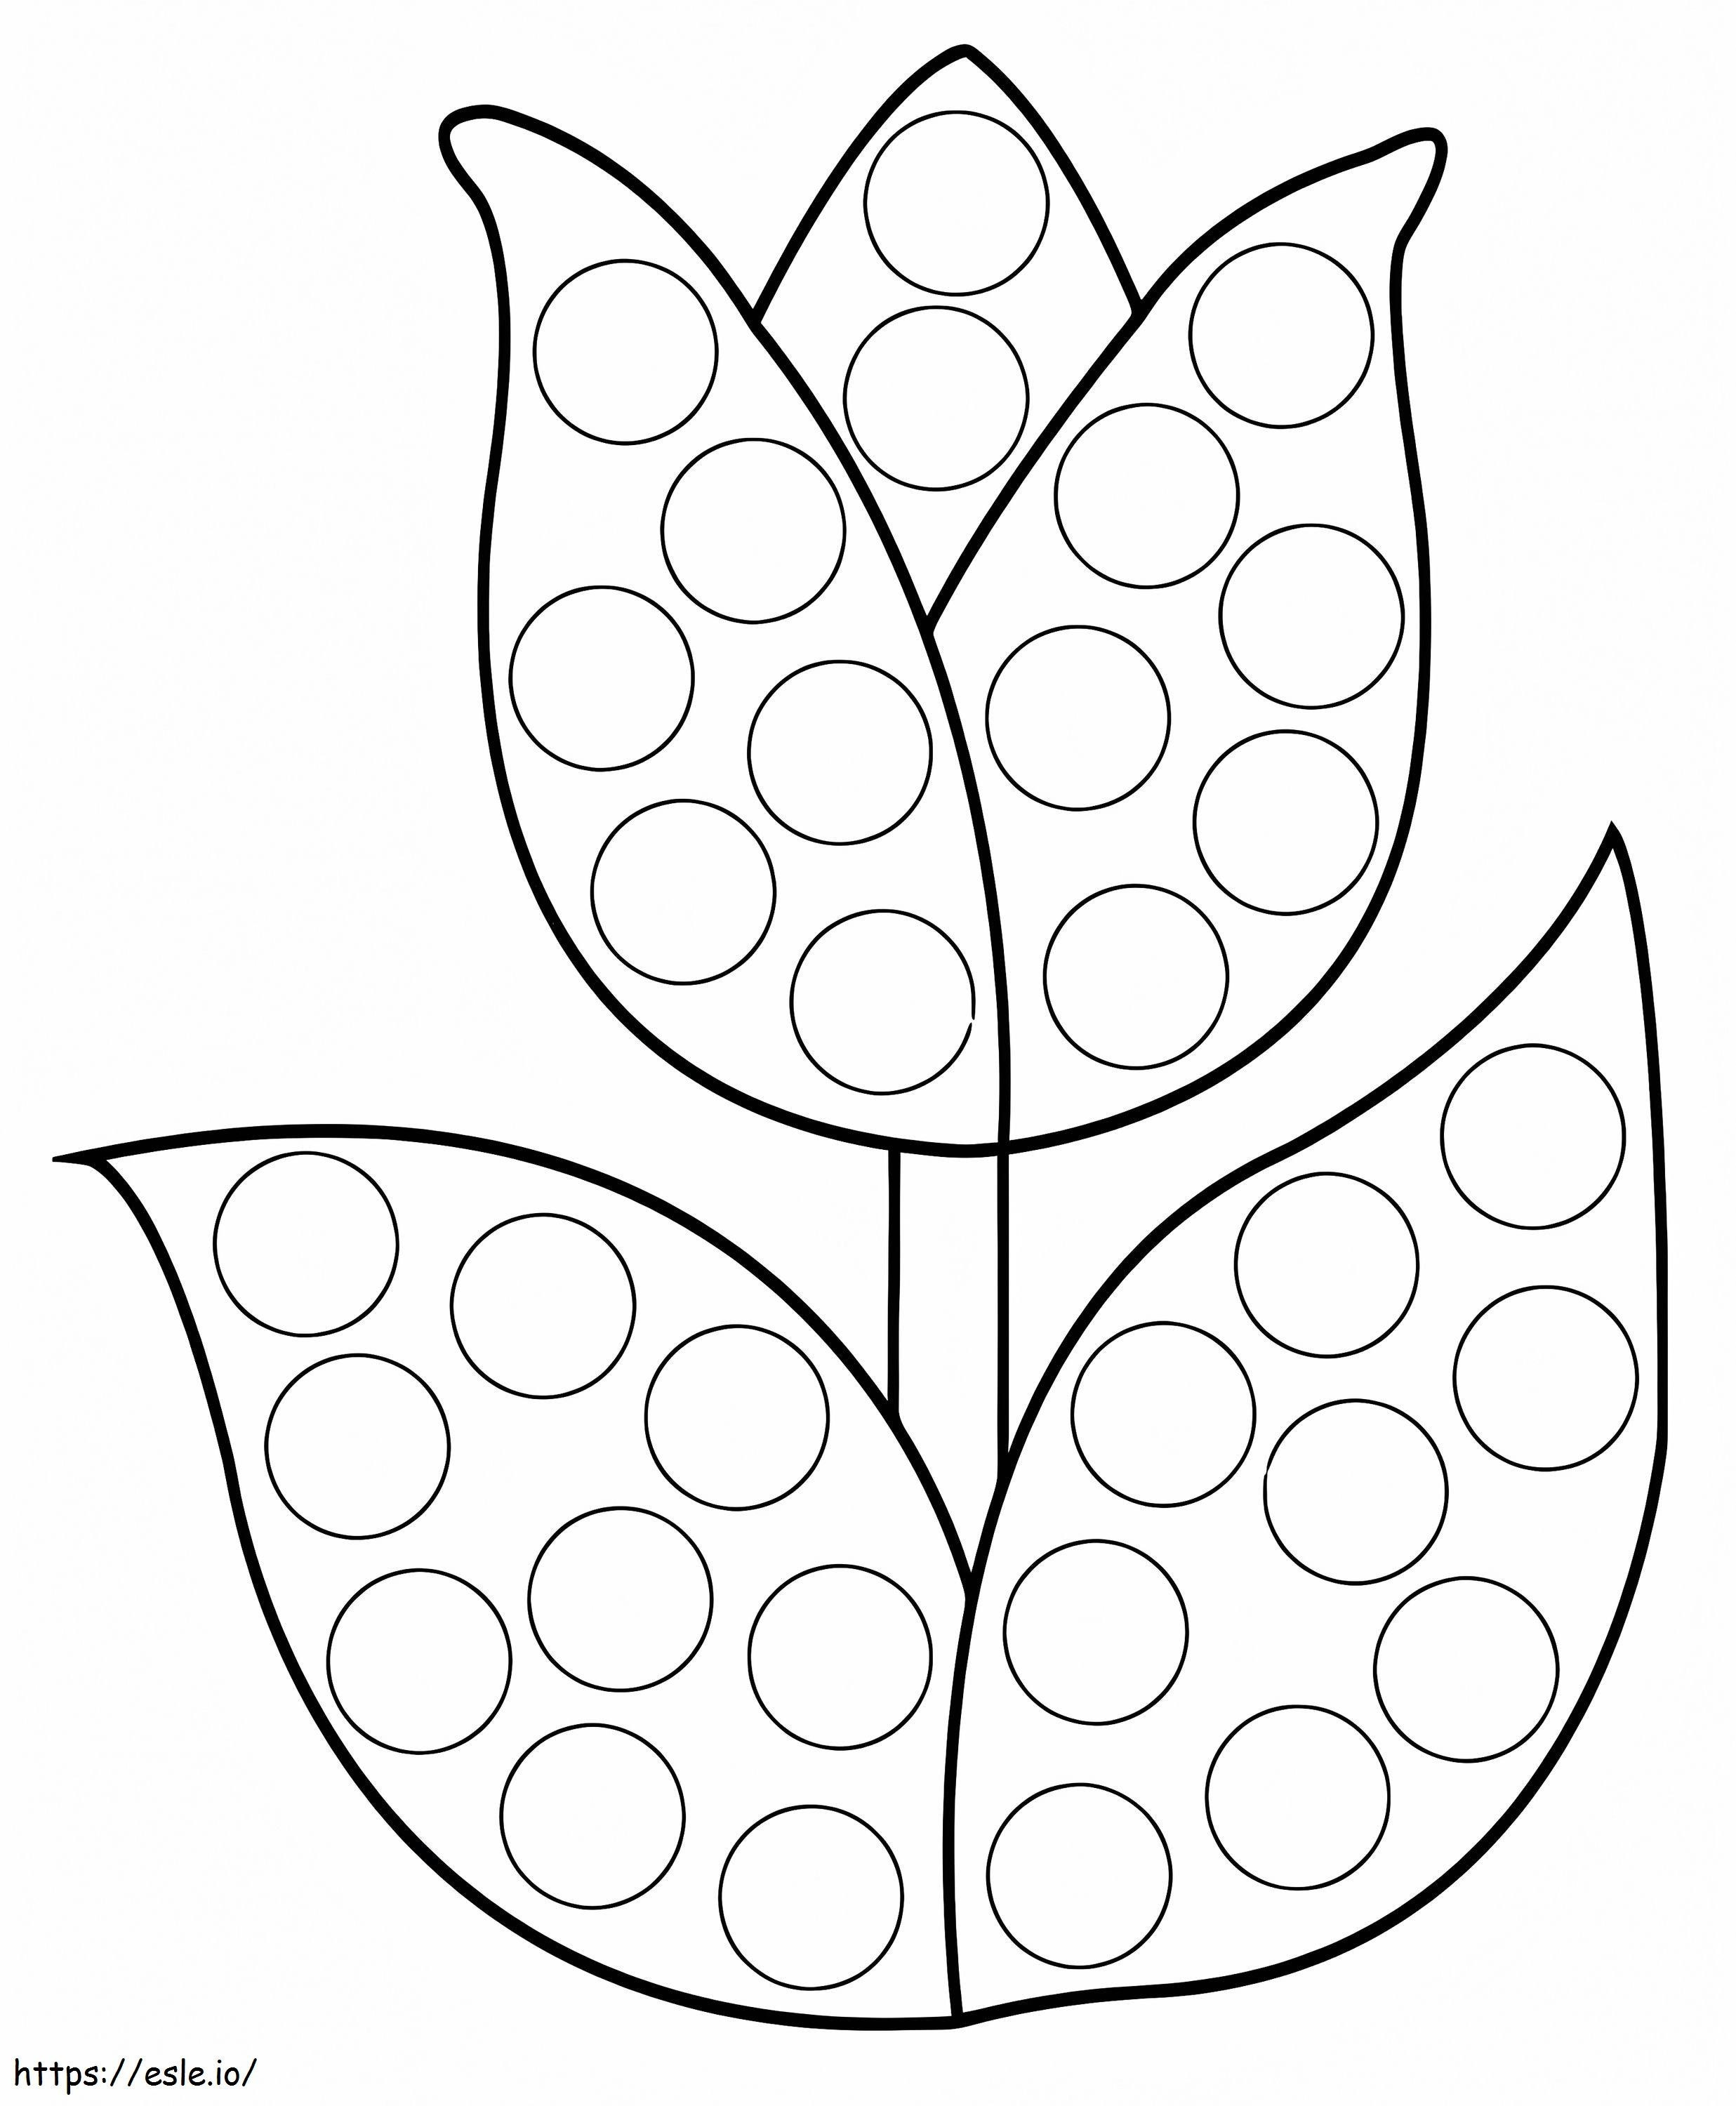 Tulip Dot Marker coloring page